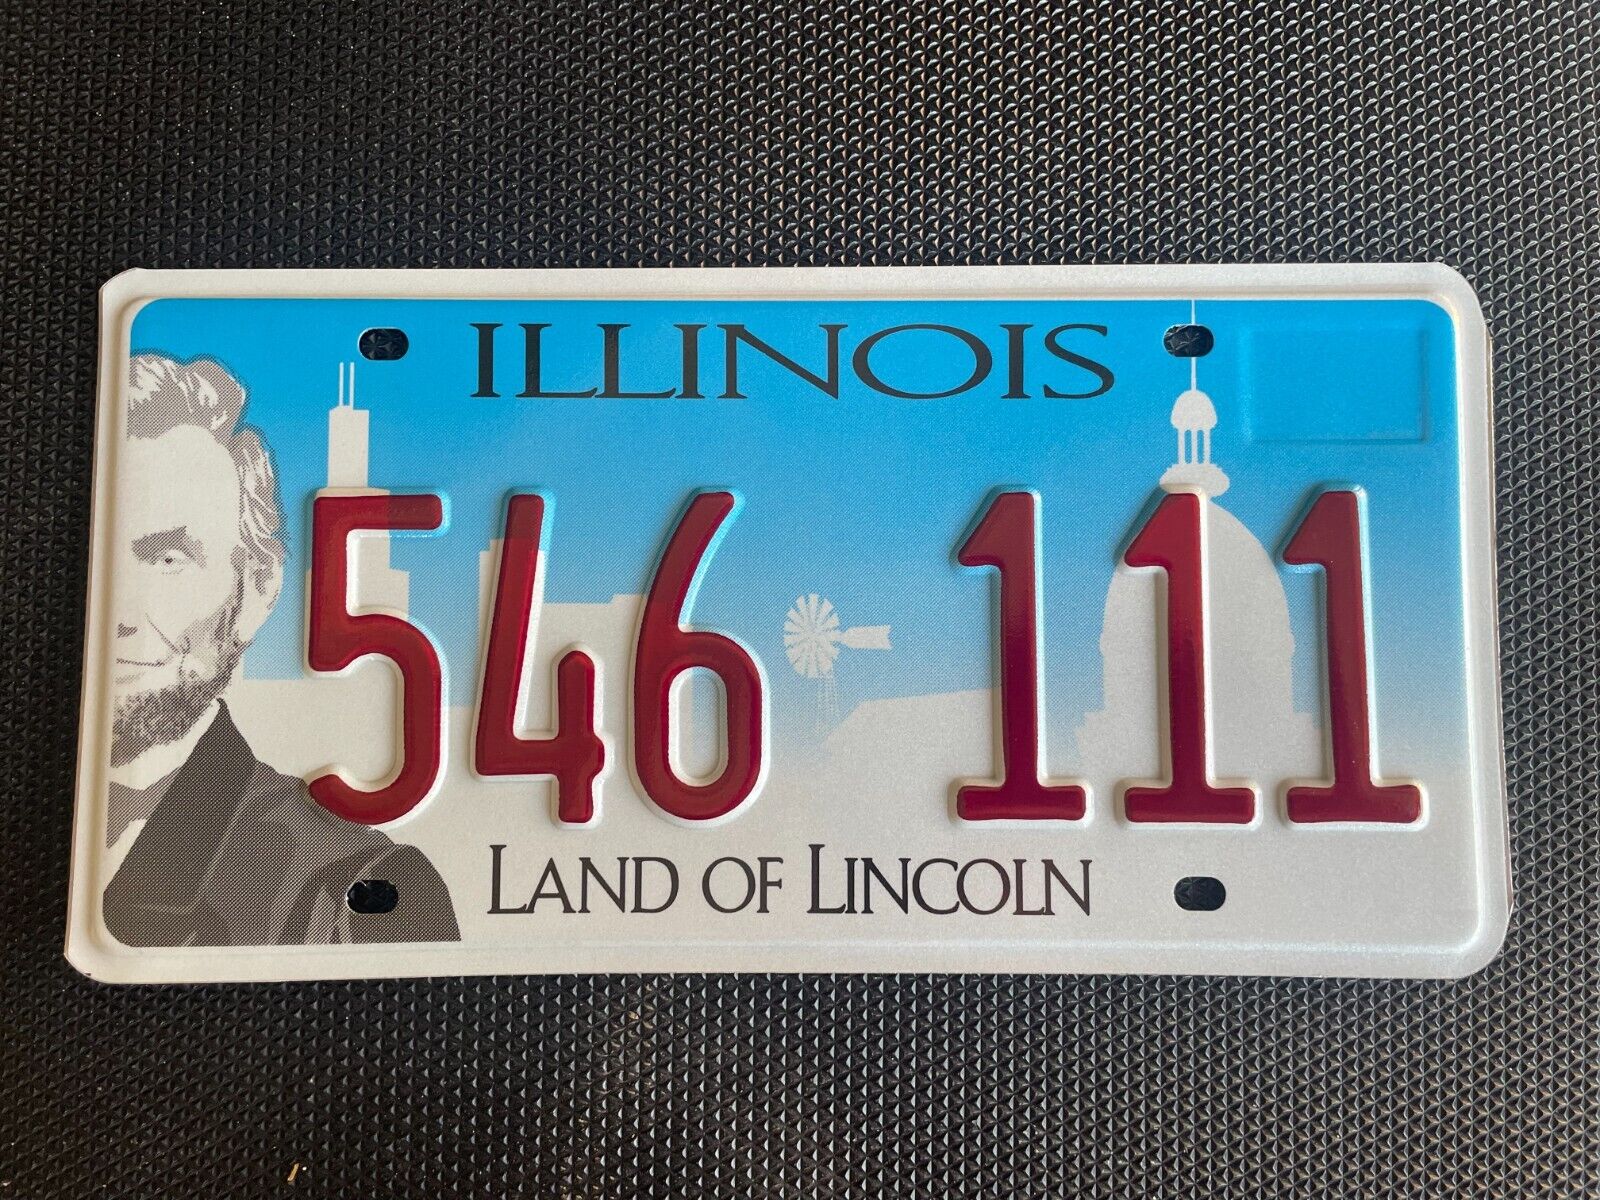 ILLINOIS TRIPLE 111 LICENSE PLATE ONES TRIPLE NUMBER REPEATING 546 111